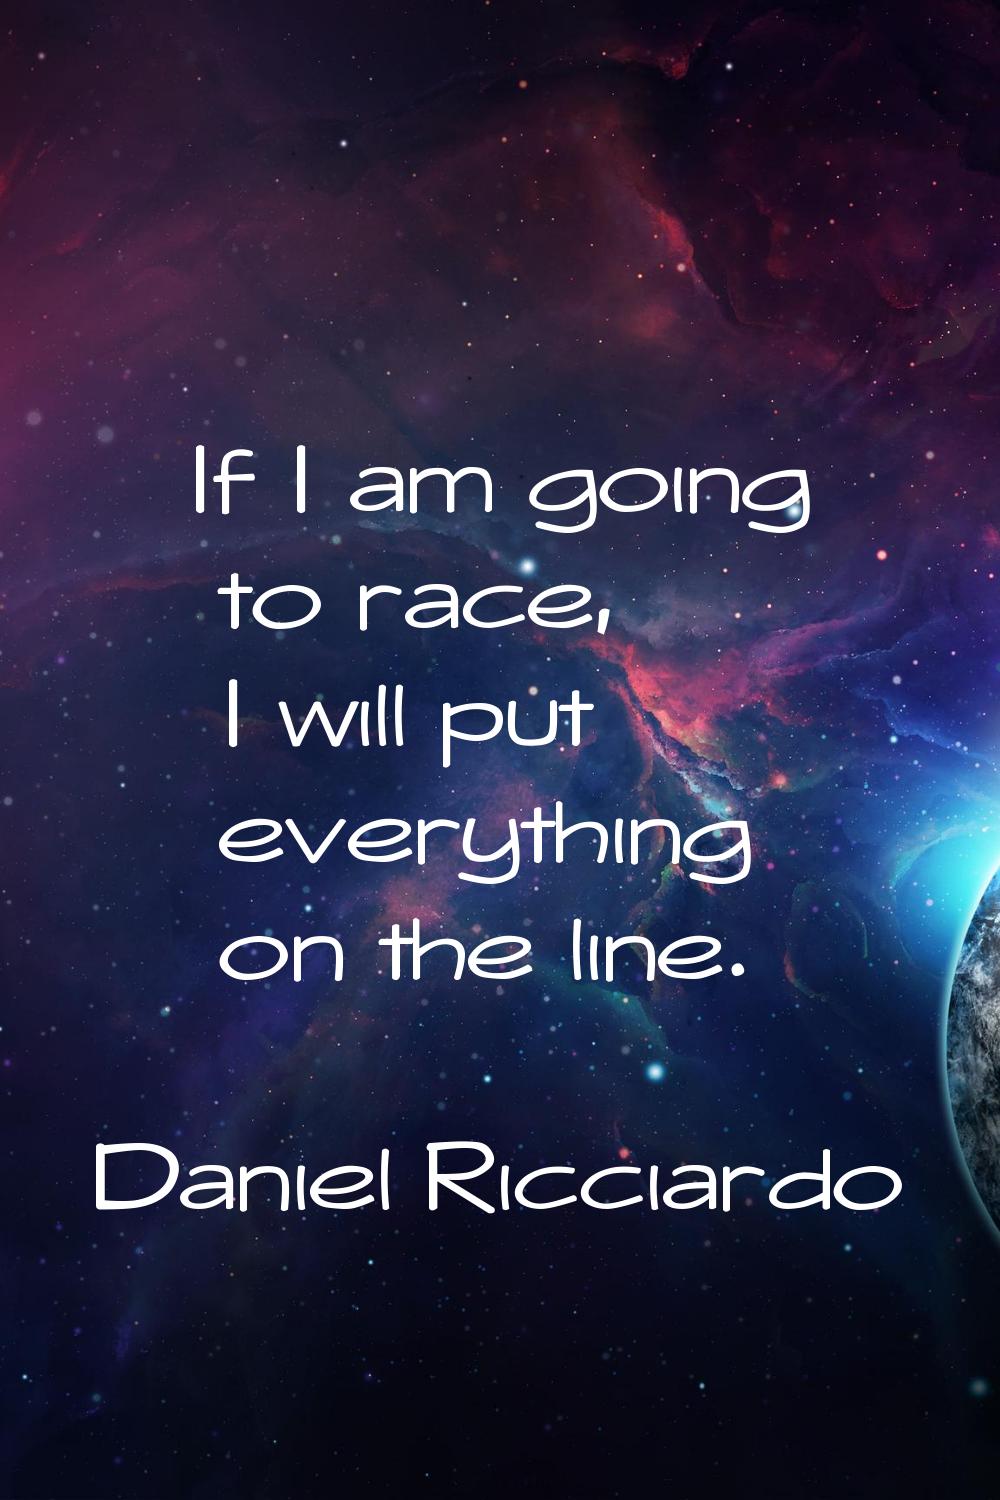 If I am going to race, I will put everything on the line.